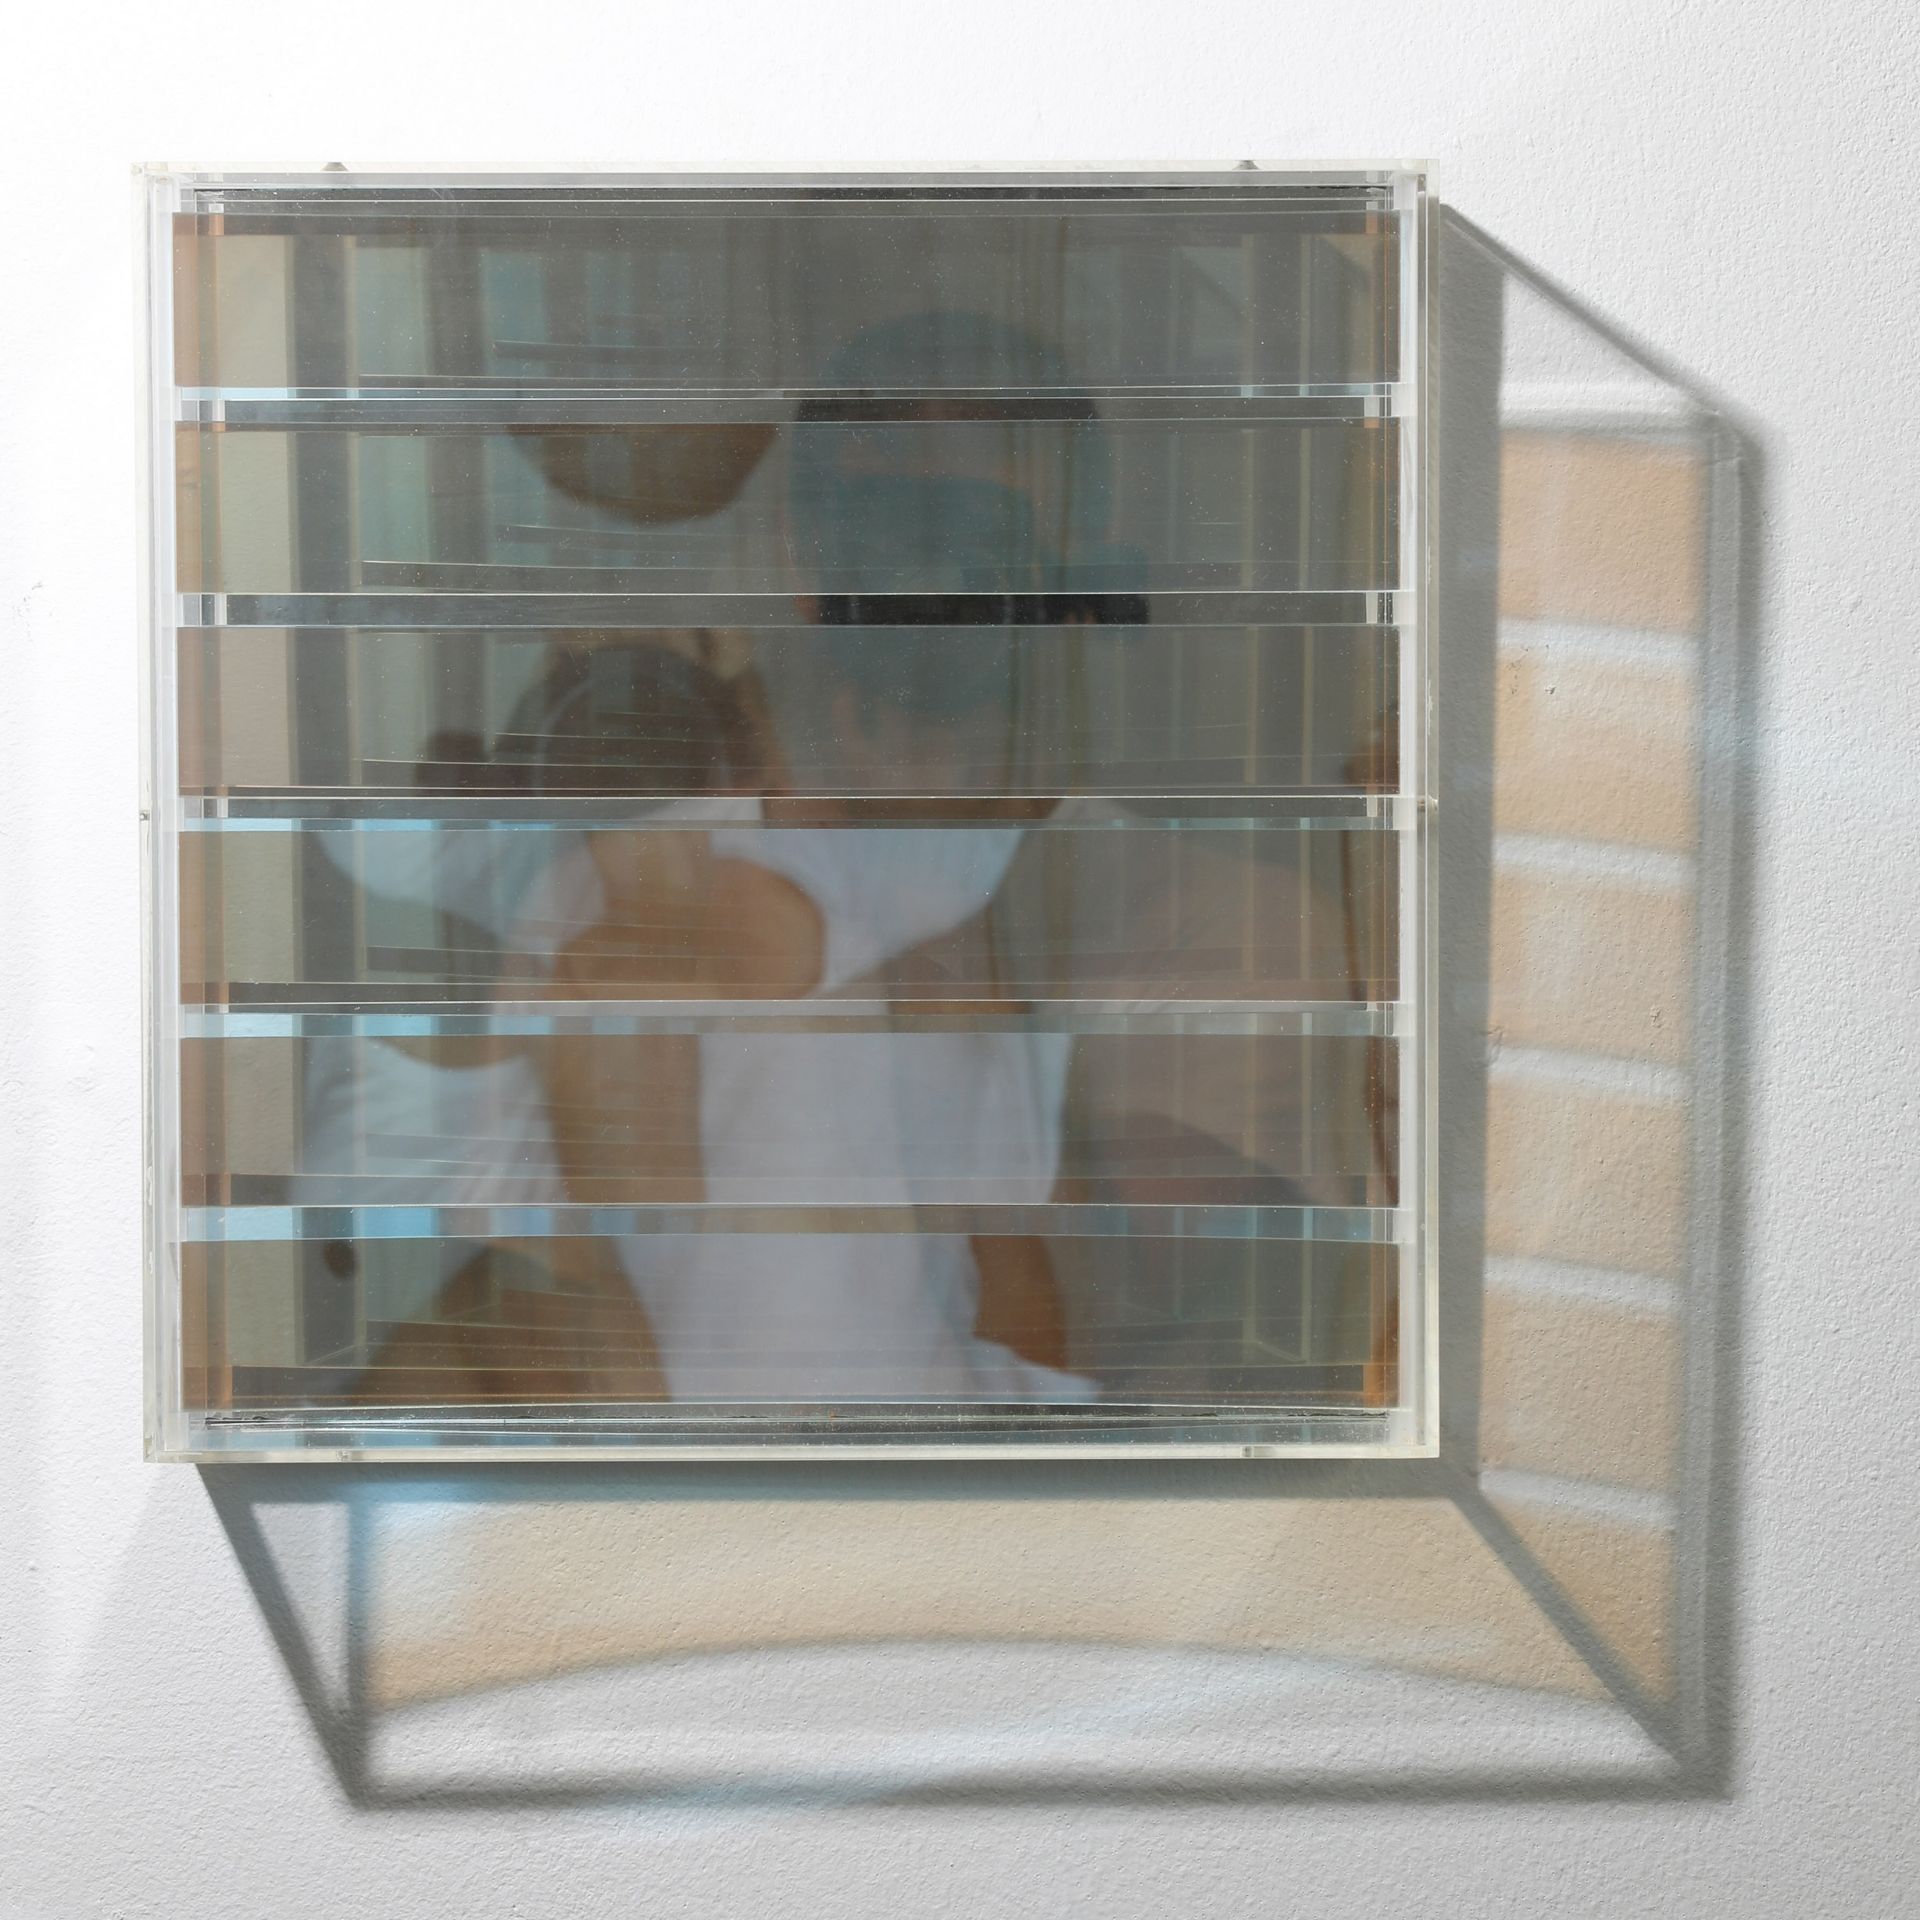 Adolf Luther*, mirror object with 6 concave stripes, 1976 - Image 5 of 8